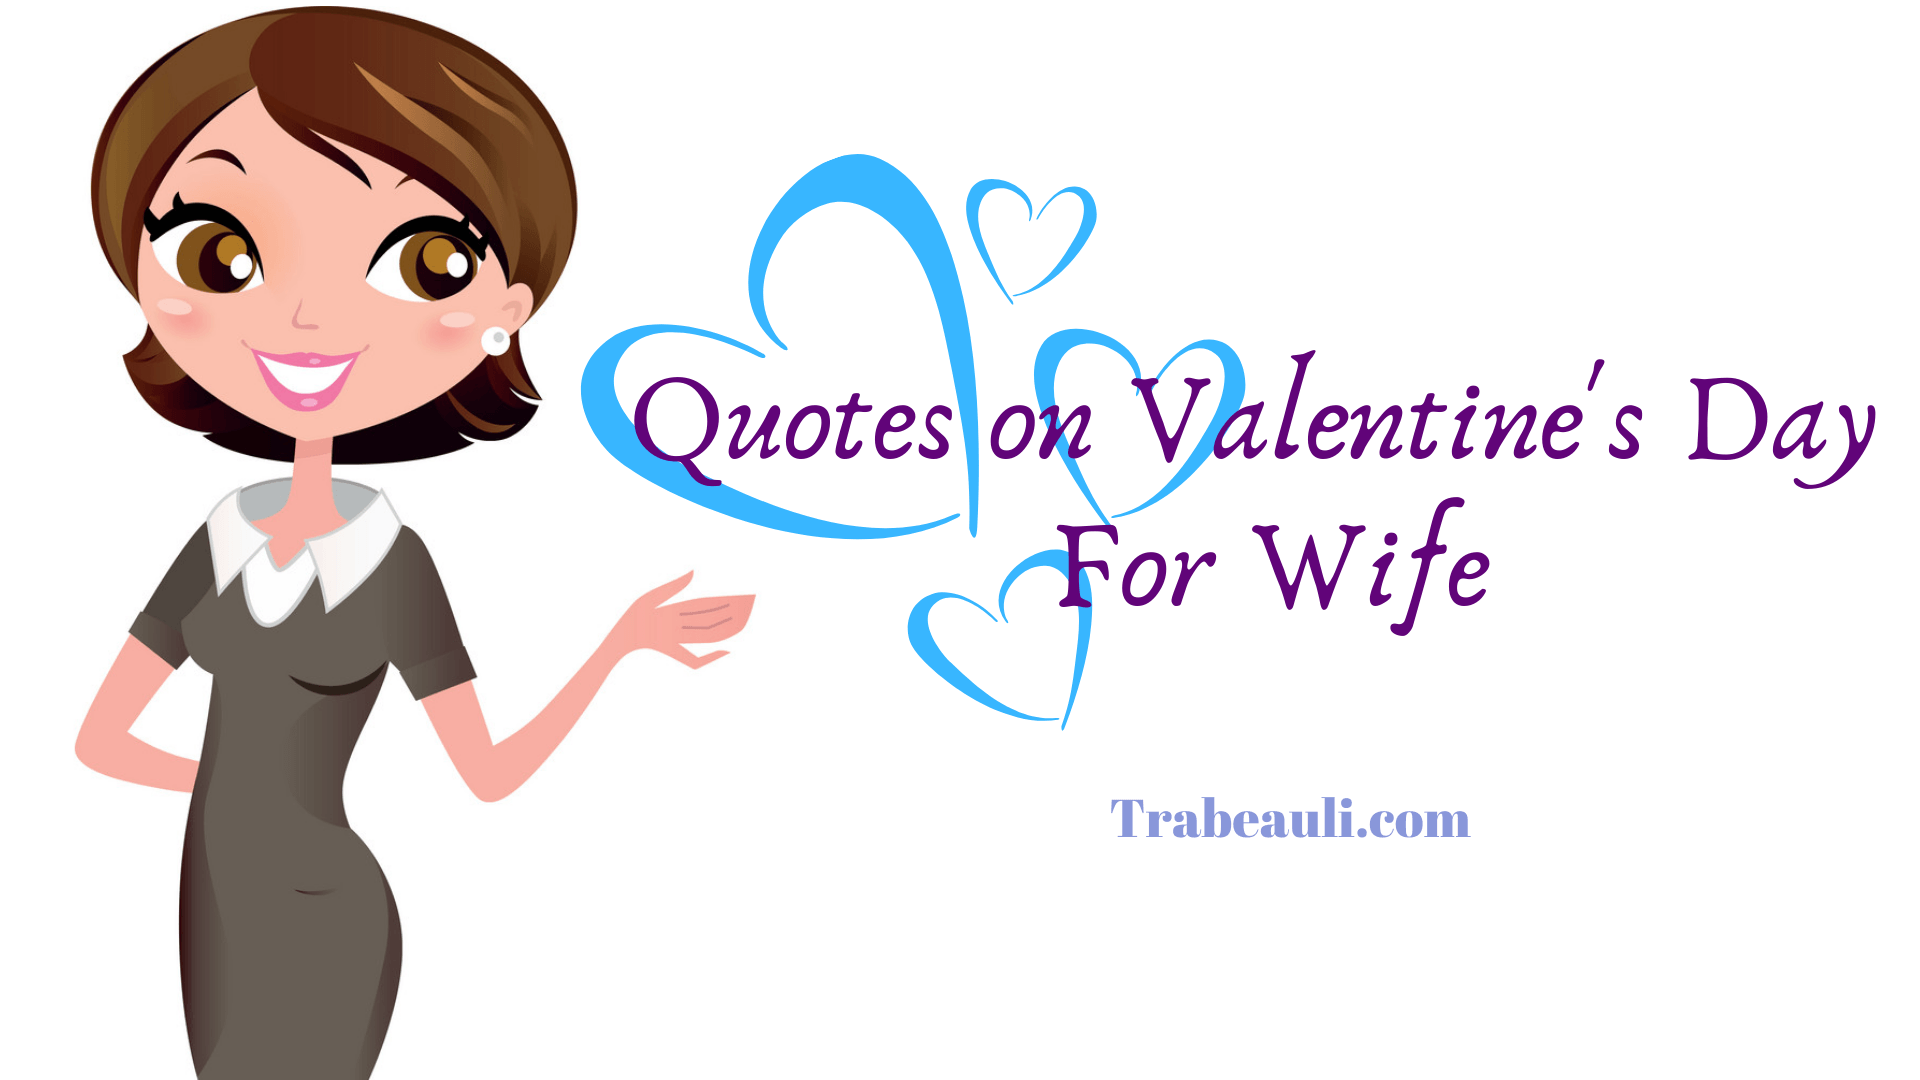 Quotes on Valentines Day